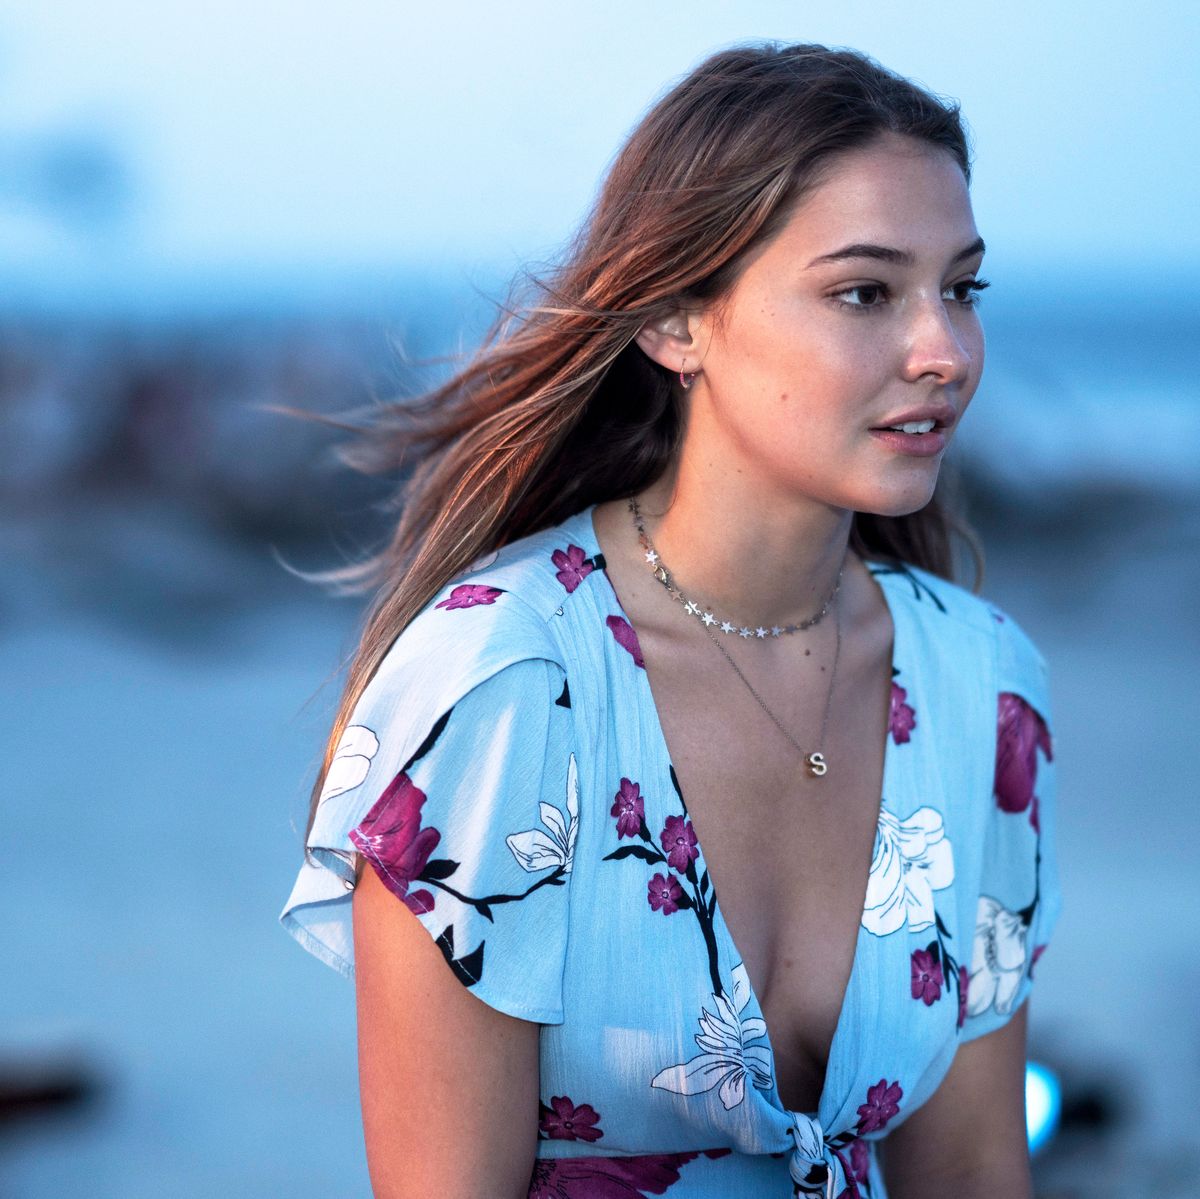 Who Is Madelyn Cline? Meet the Star of Netflix's Outer Banks